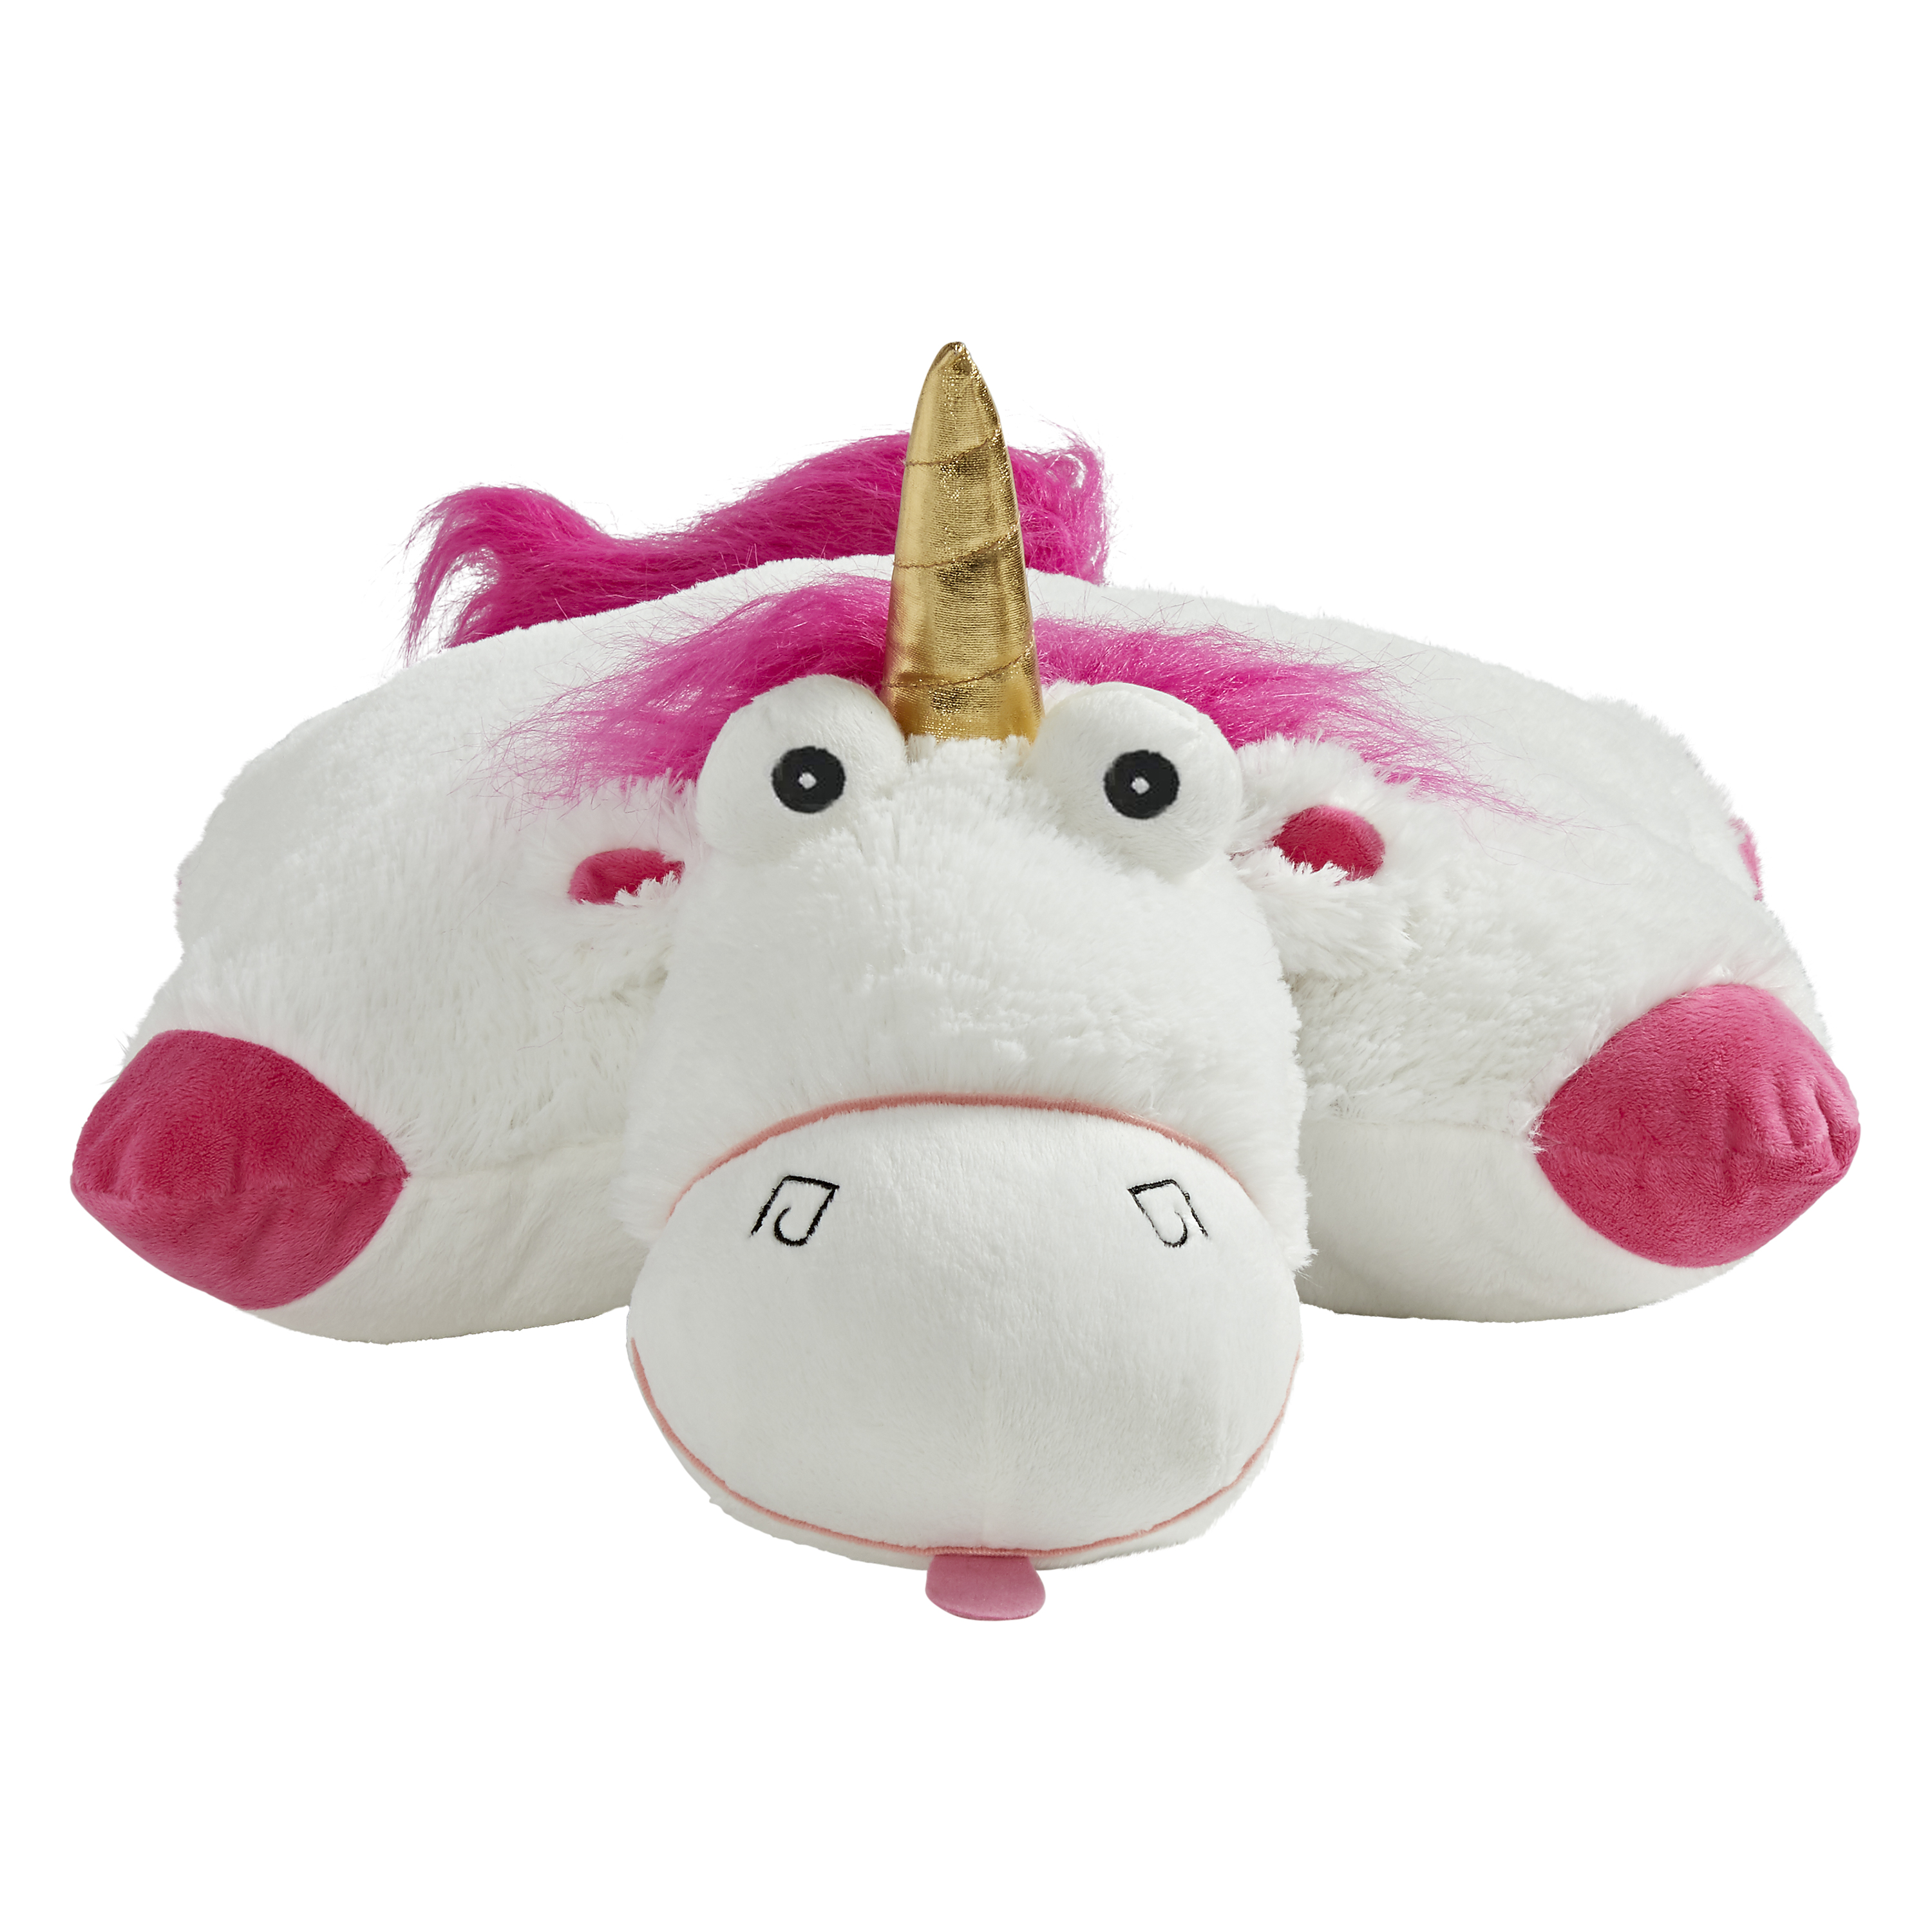 Pillow Pets NBCUniversal Despicable Me Fluffy the Unicorn Stuffed Animal Plush Toy - image 2 of 4